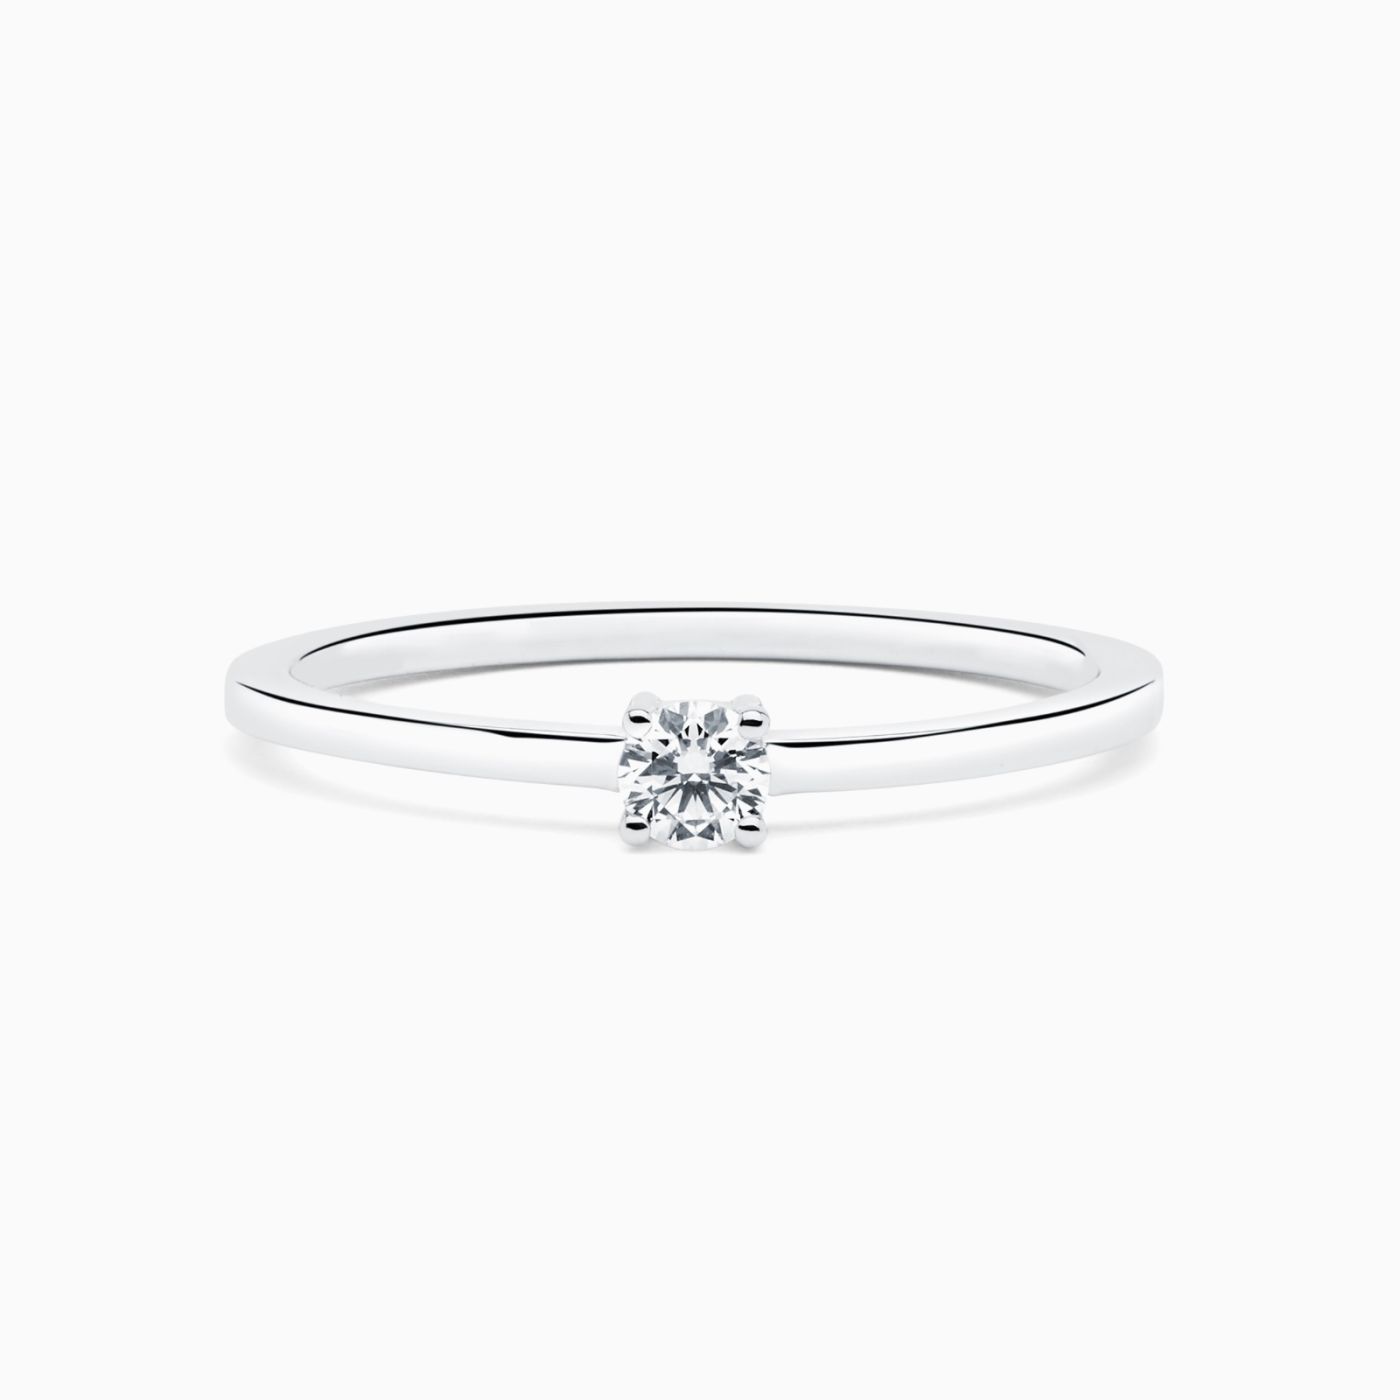 Poetic Thin solitaire engagement ring